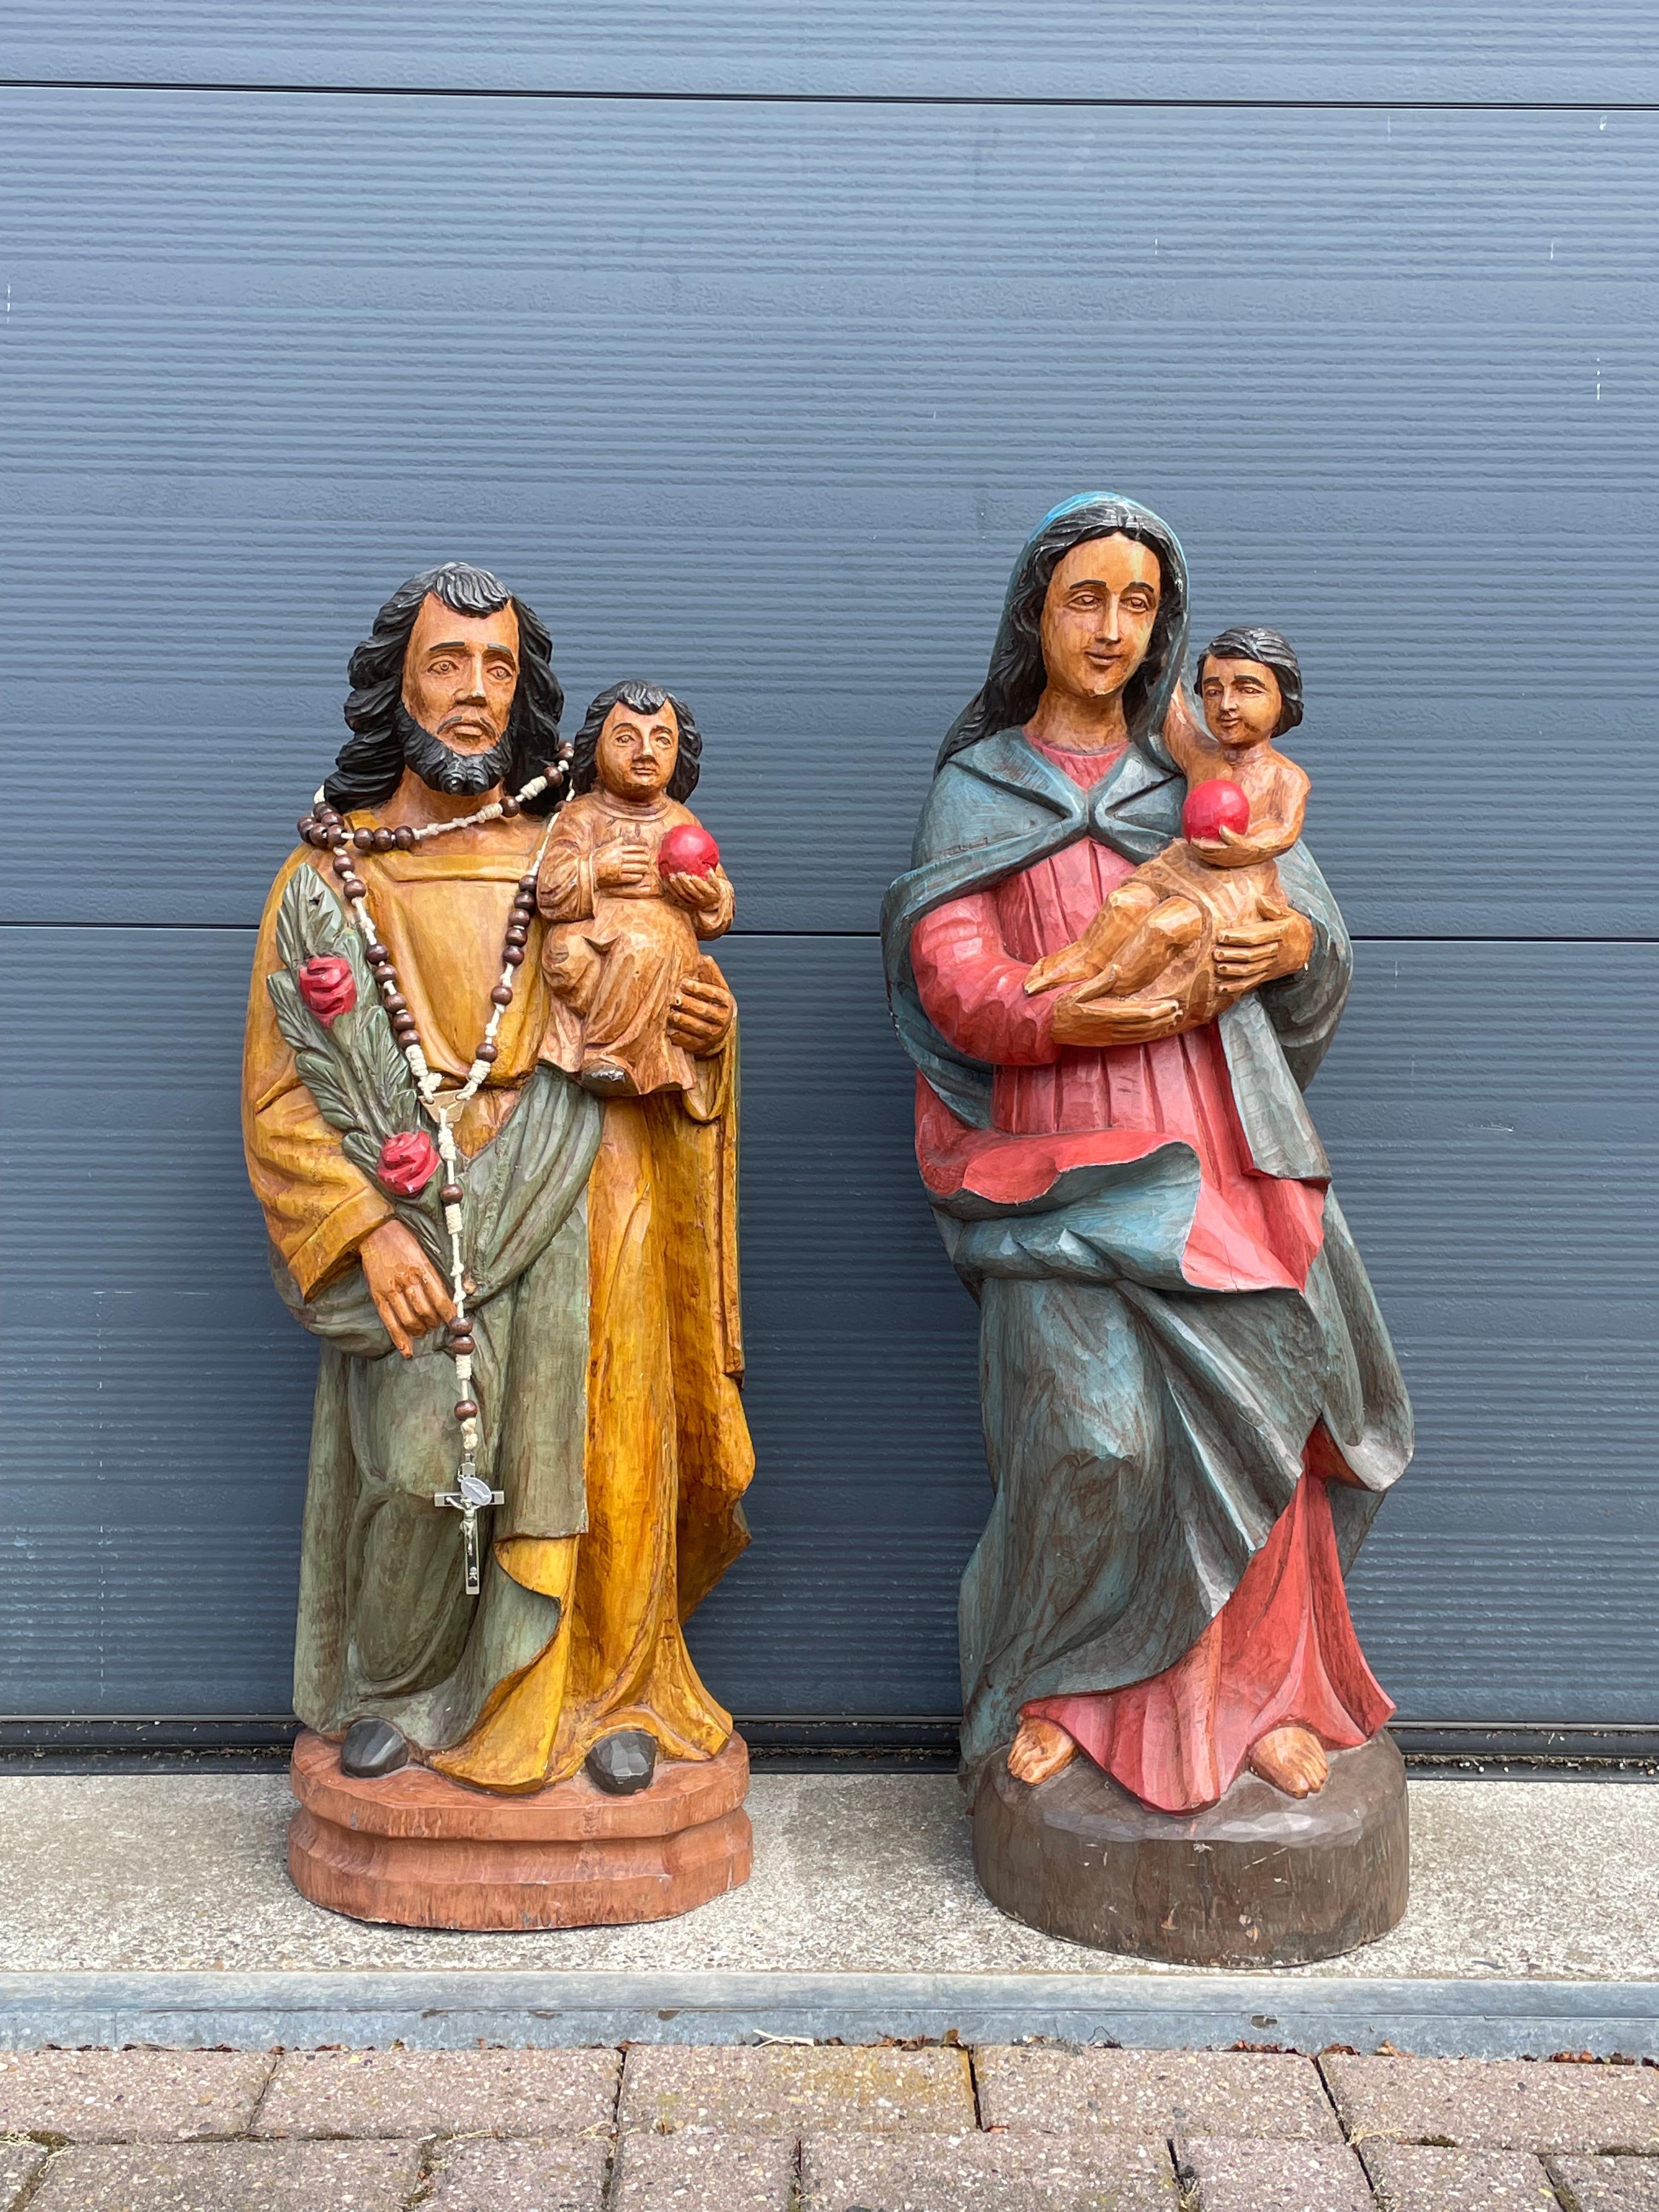 Large Pair of Hand Carved Wooden Mary & Joseph Sculptures, Both with Child Jesus (Holz) im Angebot